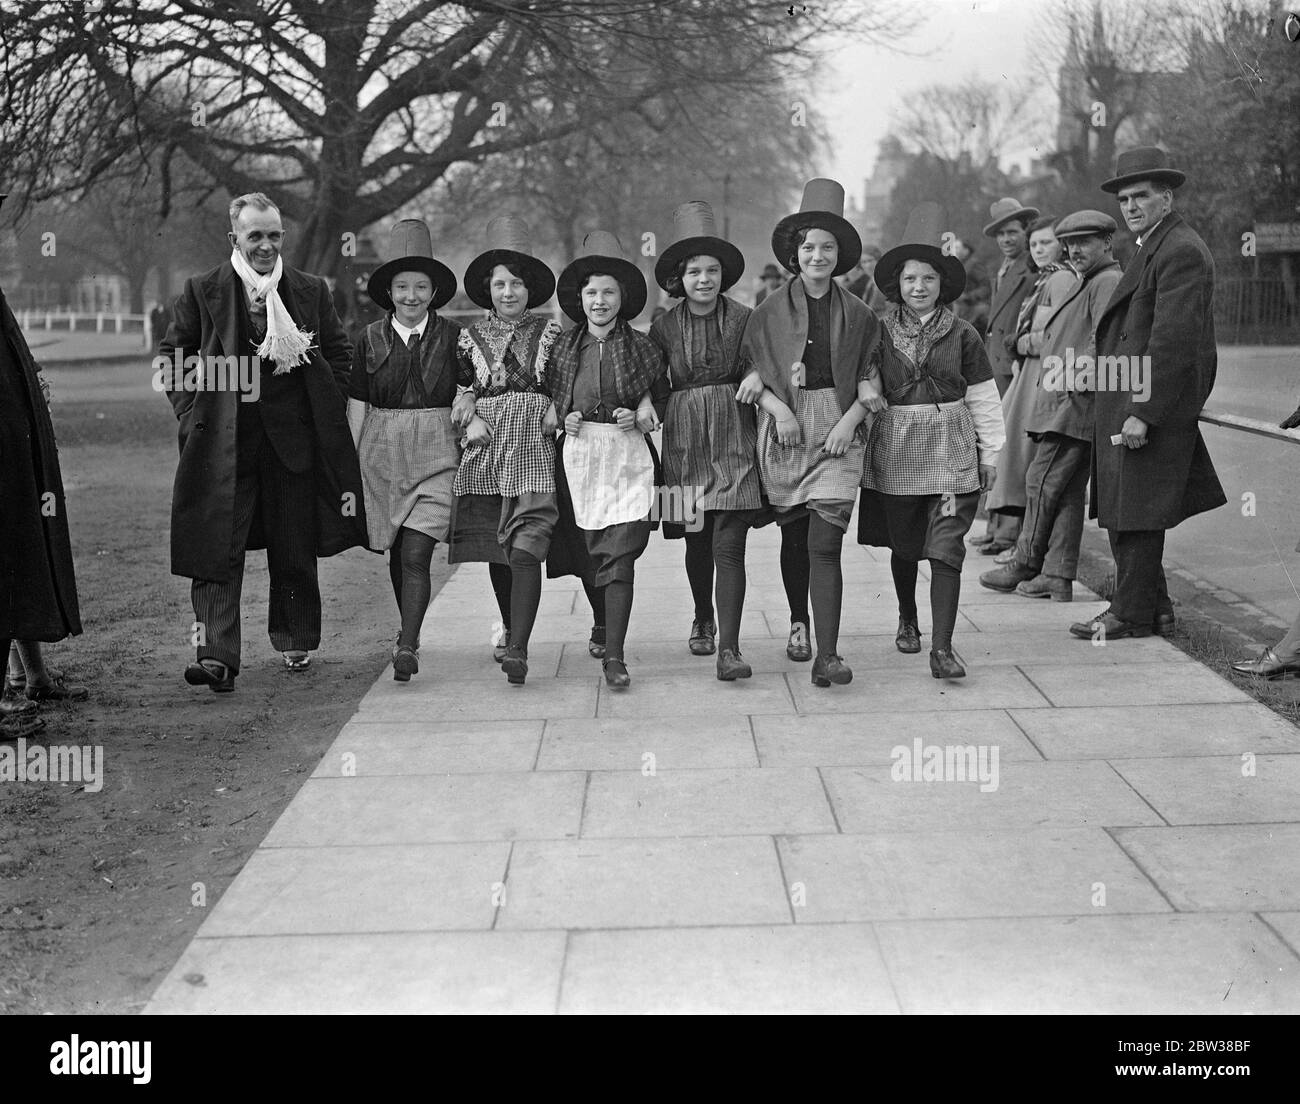 Welsh children ' s choir at Ealing in National Costume . Child members of the Aberaman juvenile choir of Wales practiced on Ealing Green before giving a concert at Ealing Town Hall . The choir has won over 300 prizes , including 11 national awards . Photo shows , some of the children in their national dress . 11 April 1934 Stock Photo